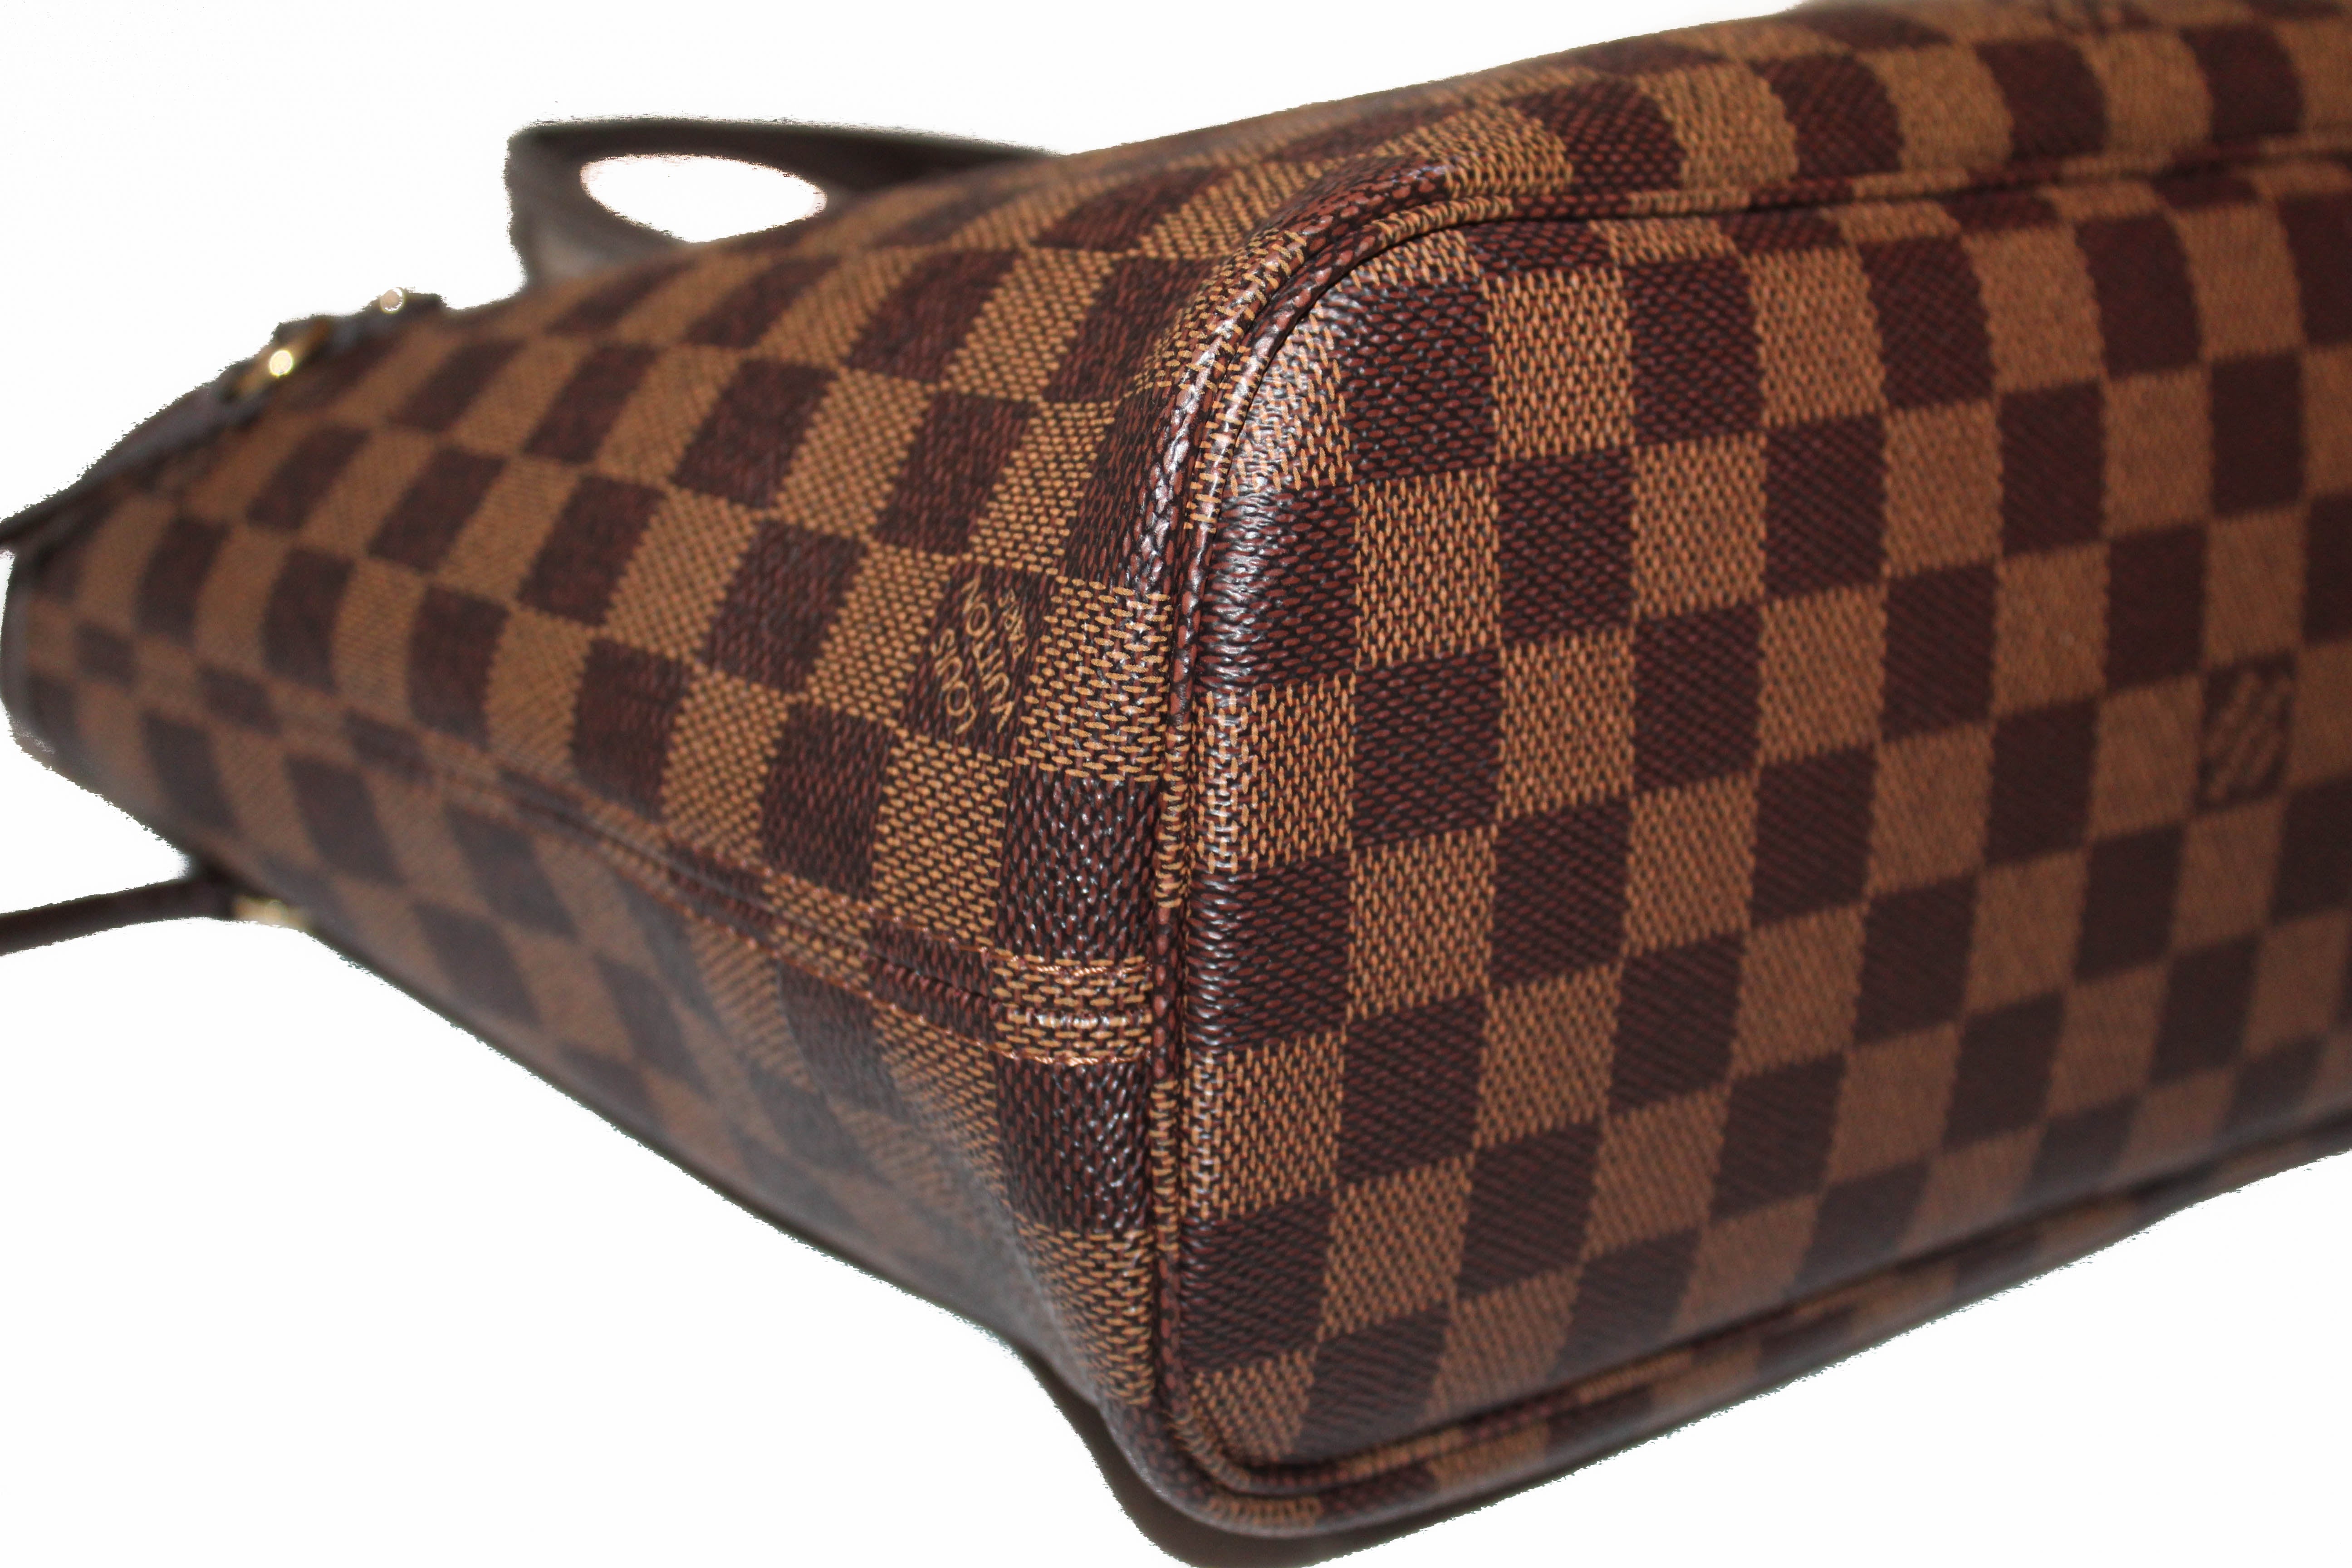 Auth Louis Vuitton Damier Ebene Neverfull PM Tote Bag Brown N51109 Used